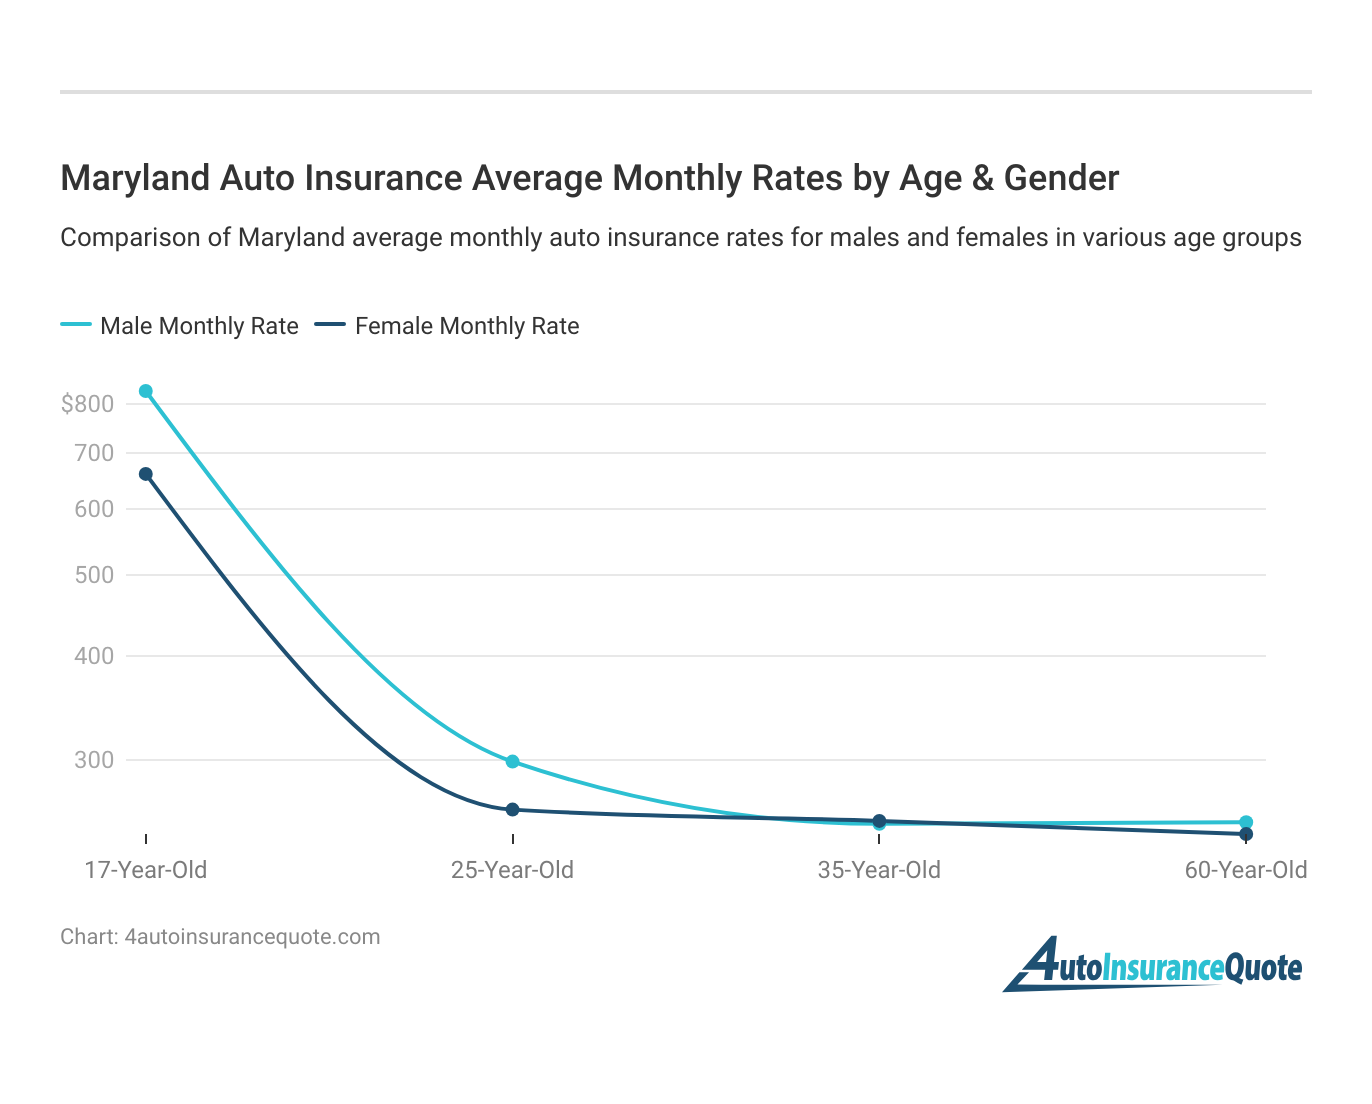 <h3>Maryland Auto Insurance Average Monthly Rates by Age & Gender</h3>